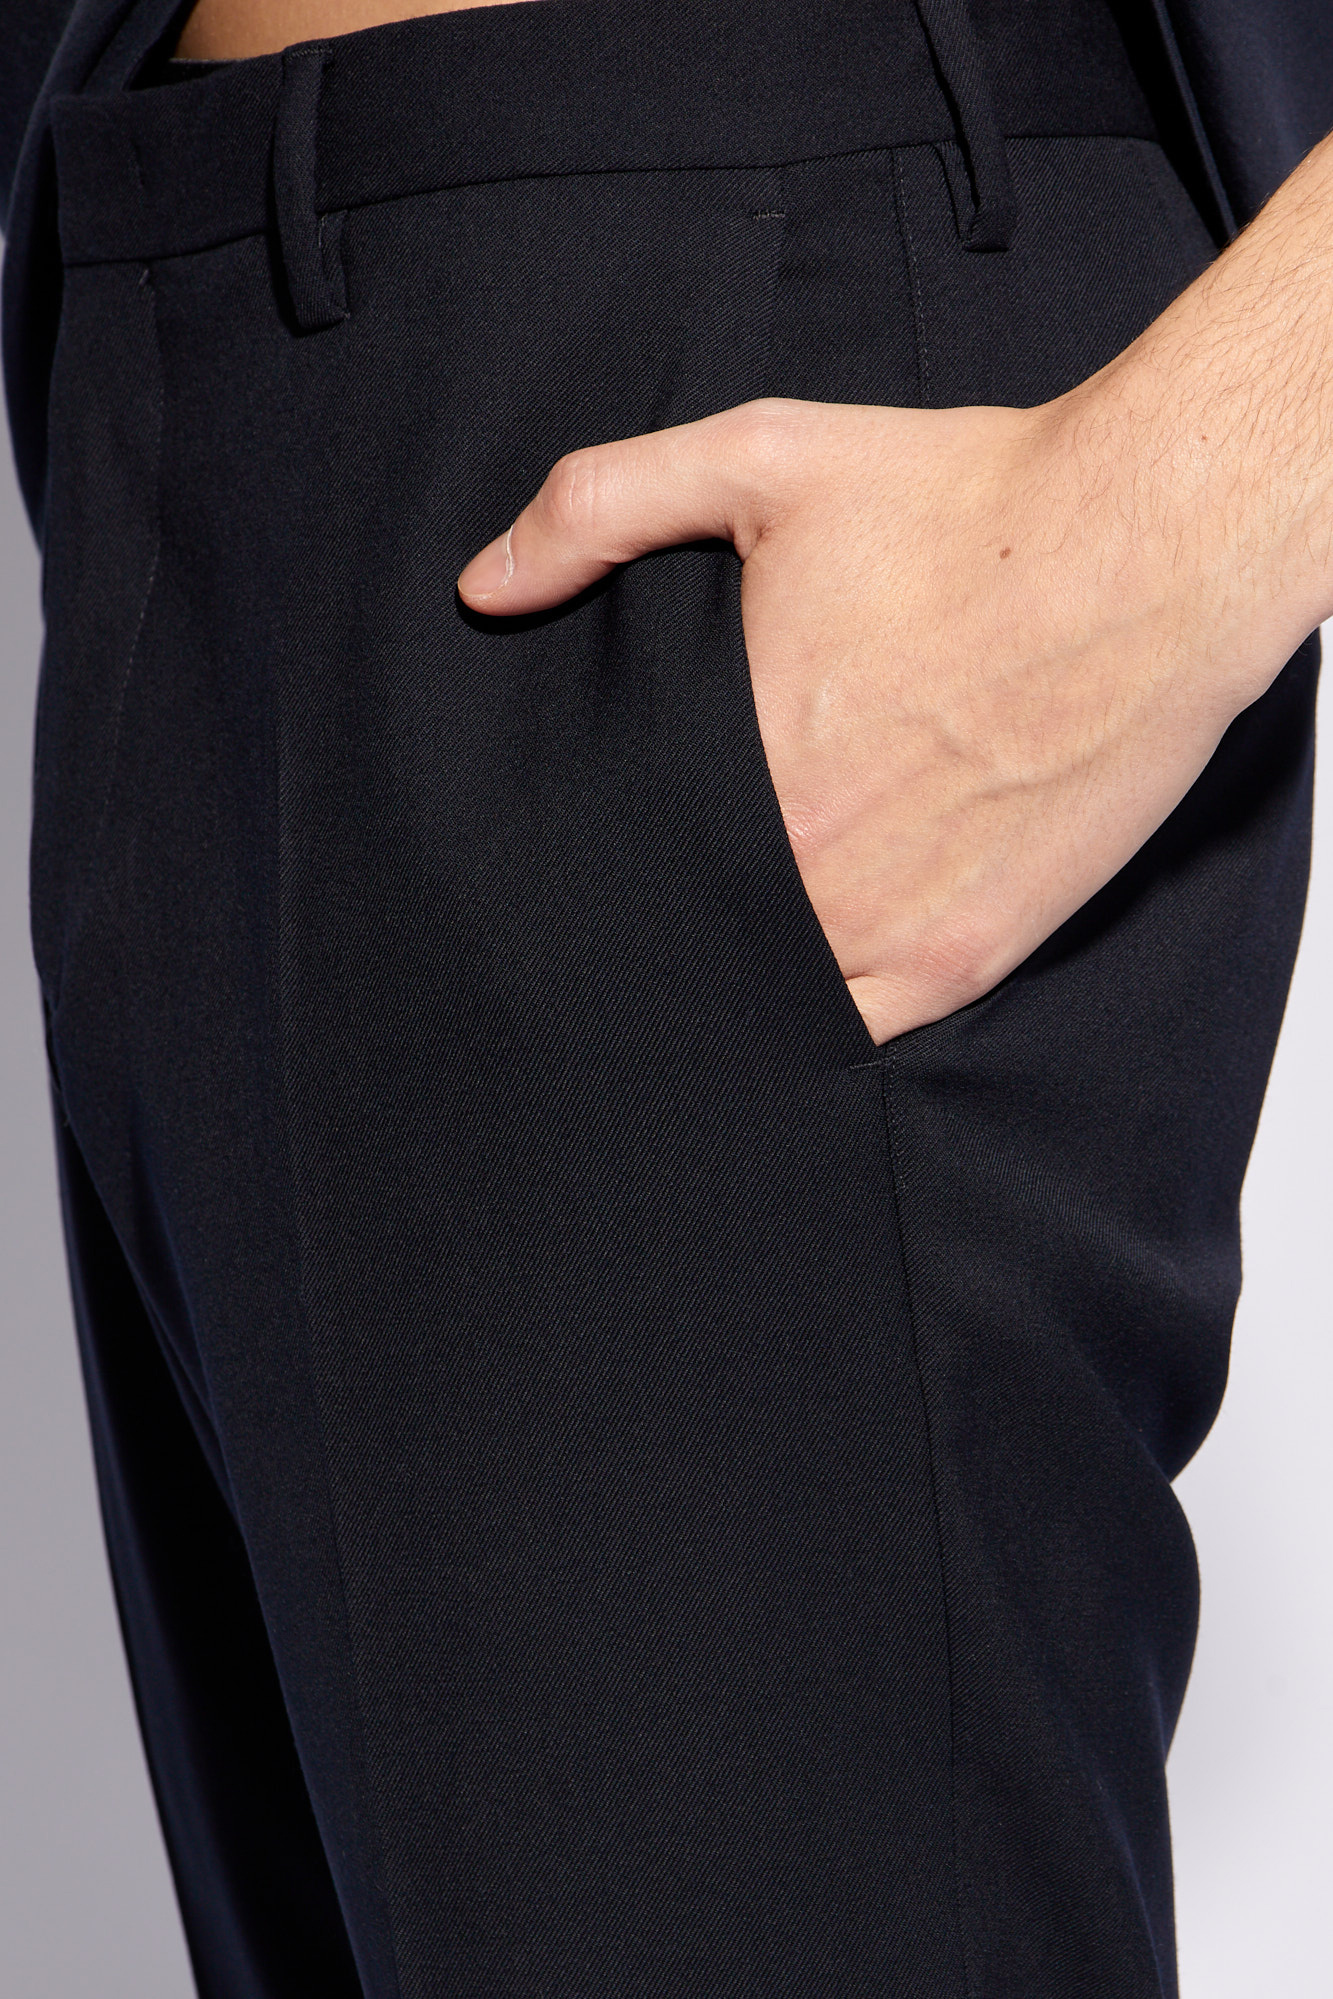 Paul Smith Pleat-front trousers